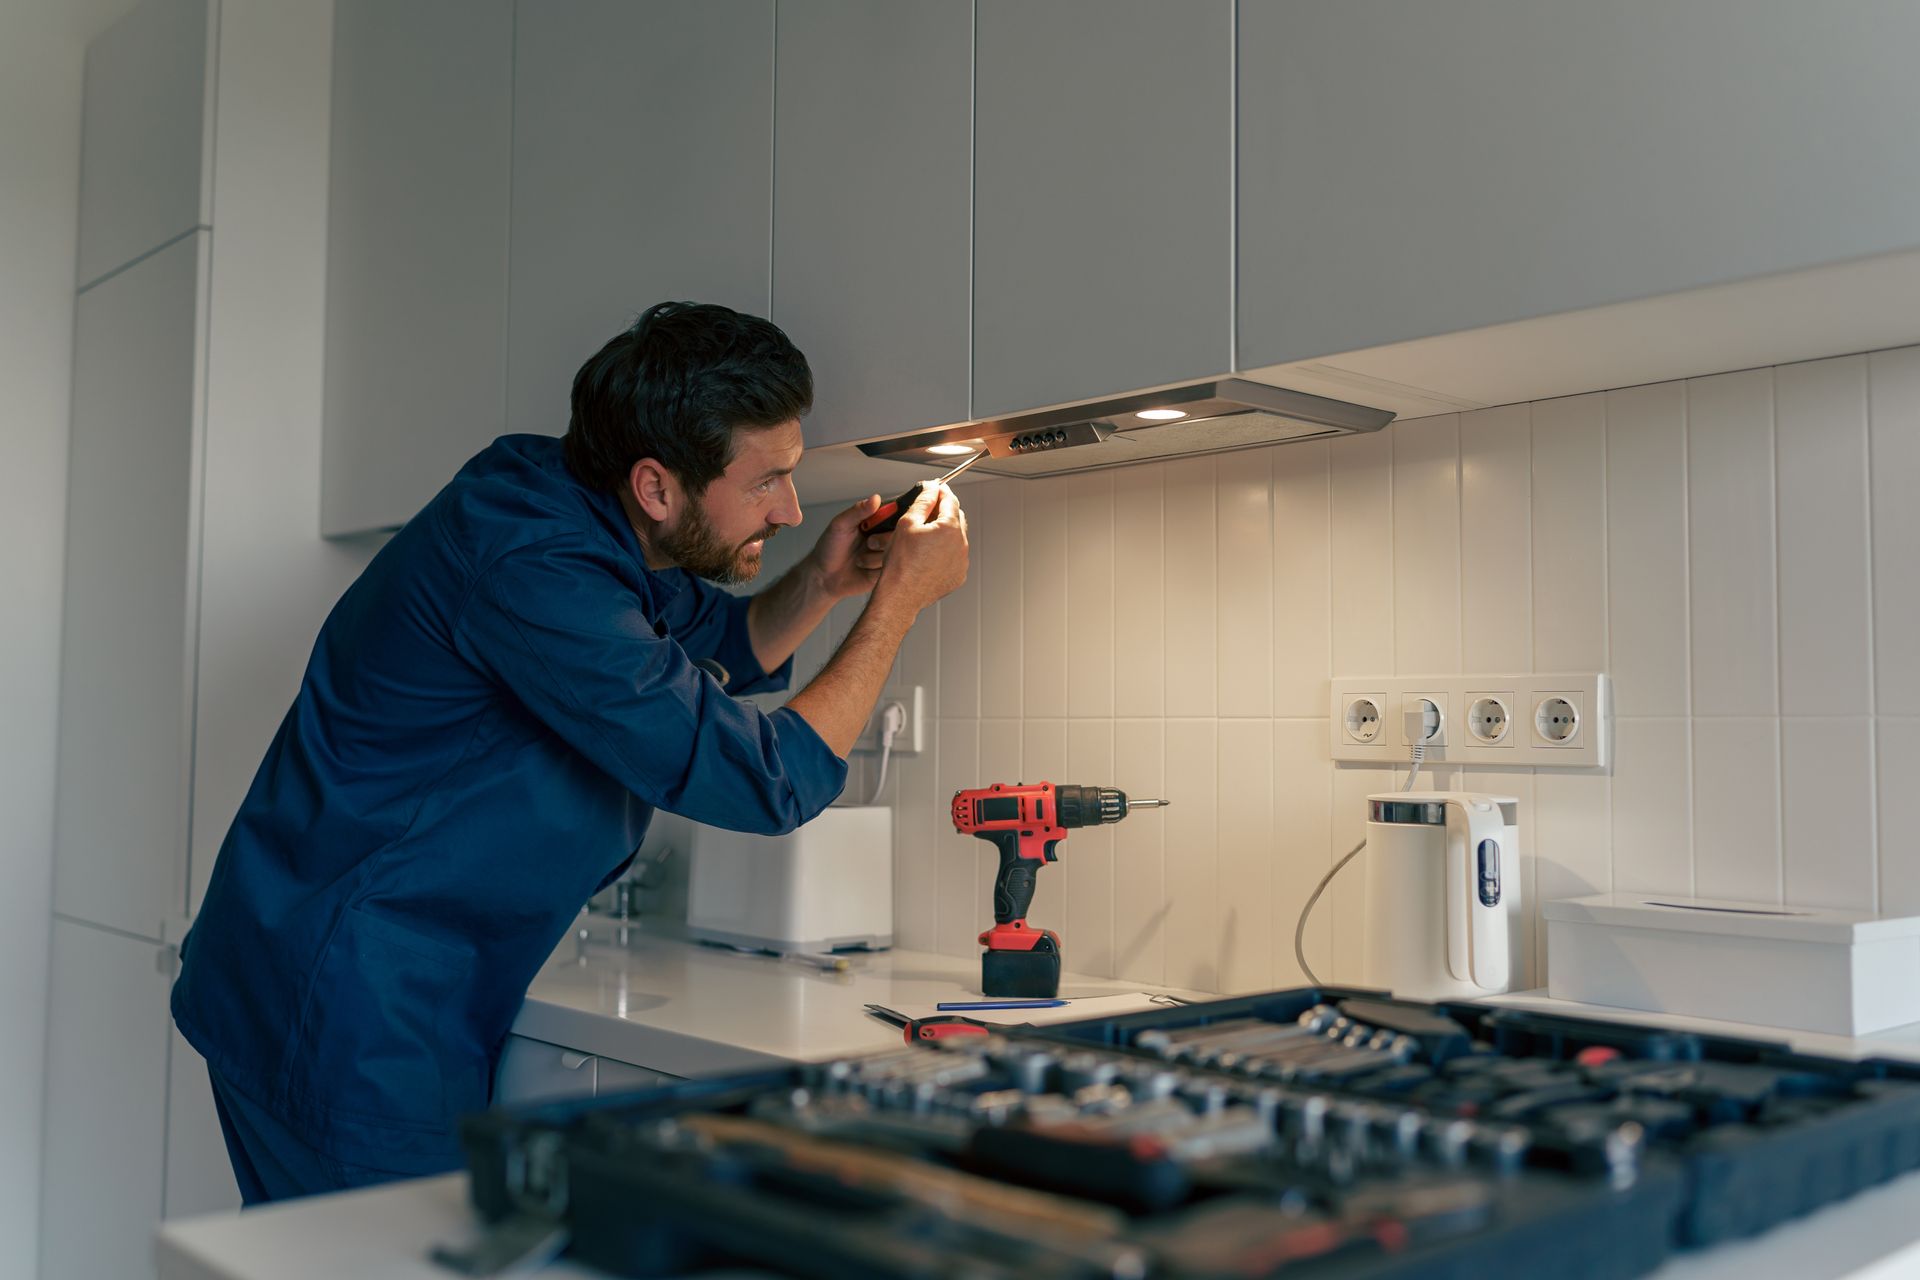 A man is fixing a light in a kitchen with a drill.